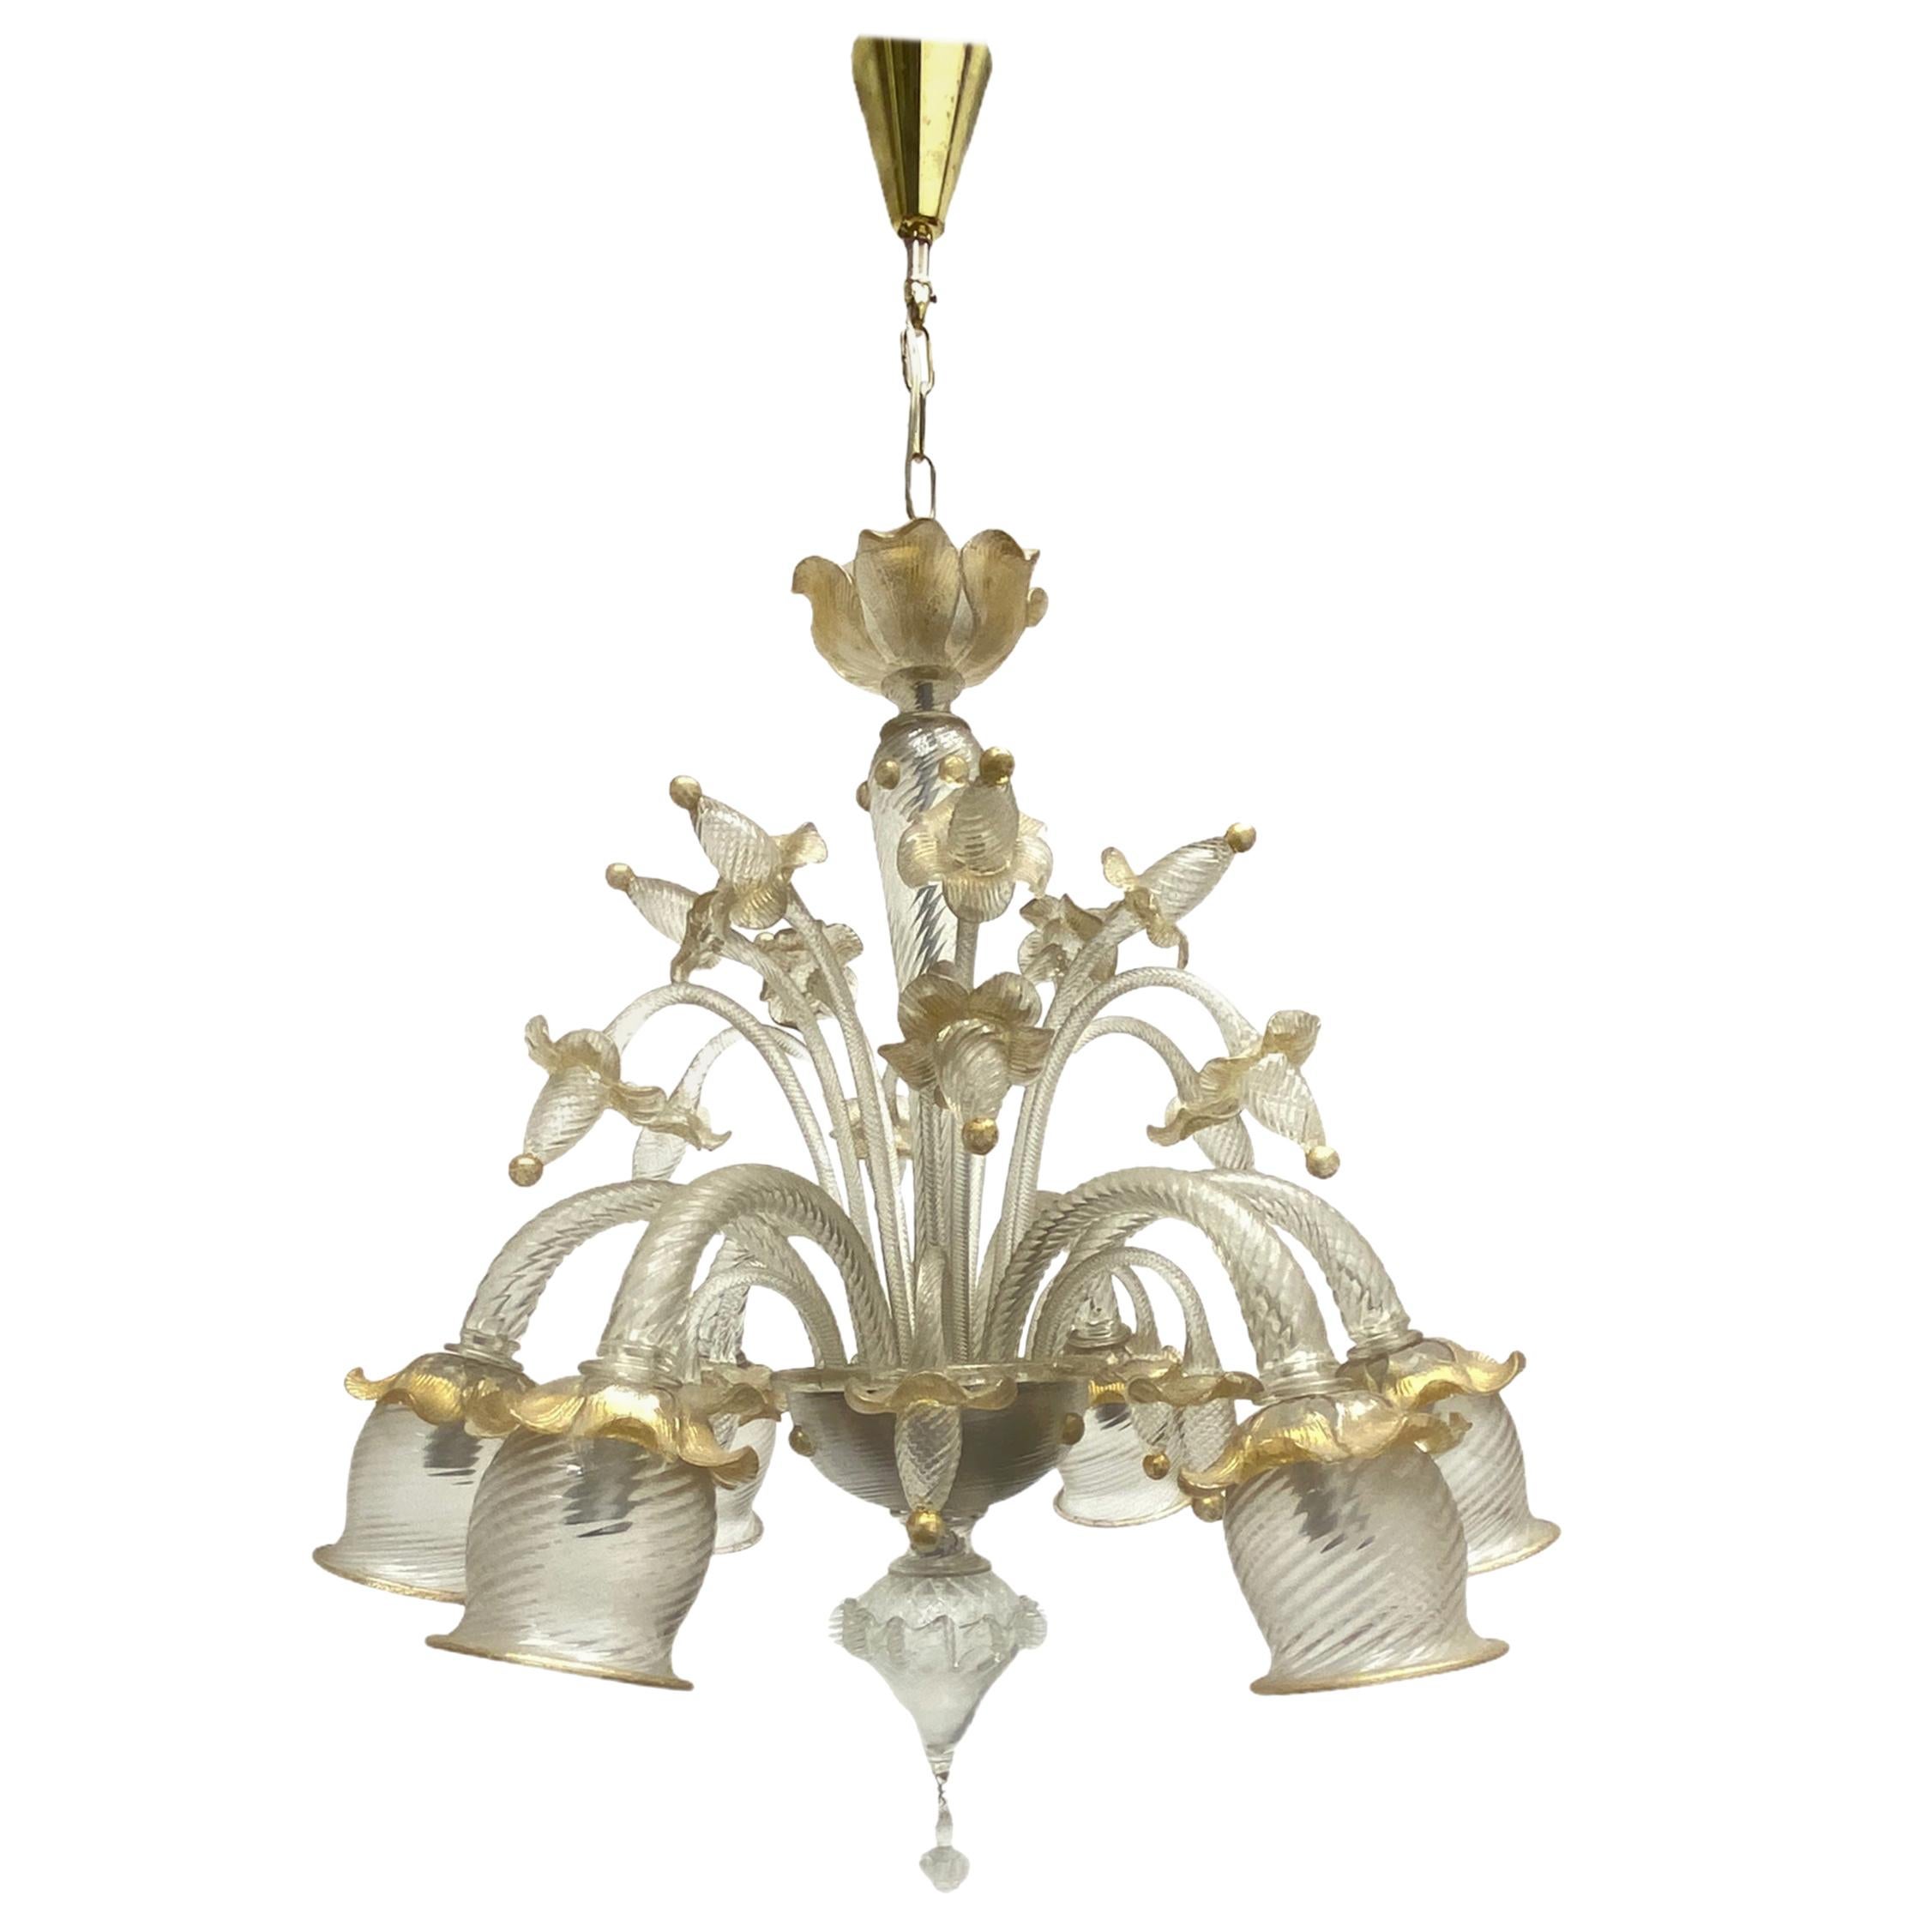 Stunning Gold Dusted Murano Chandelier, by Barovier Toso Murano, Italy, 1960s For Sale